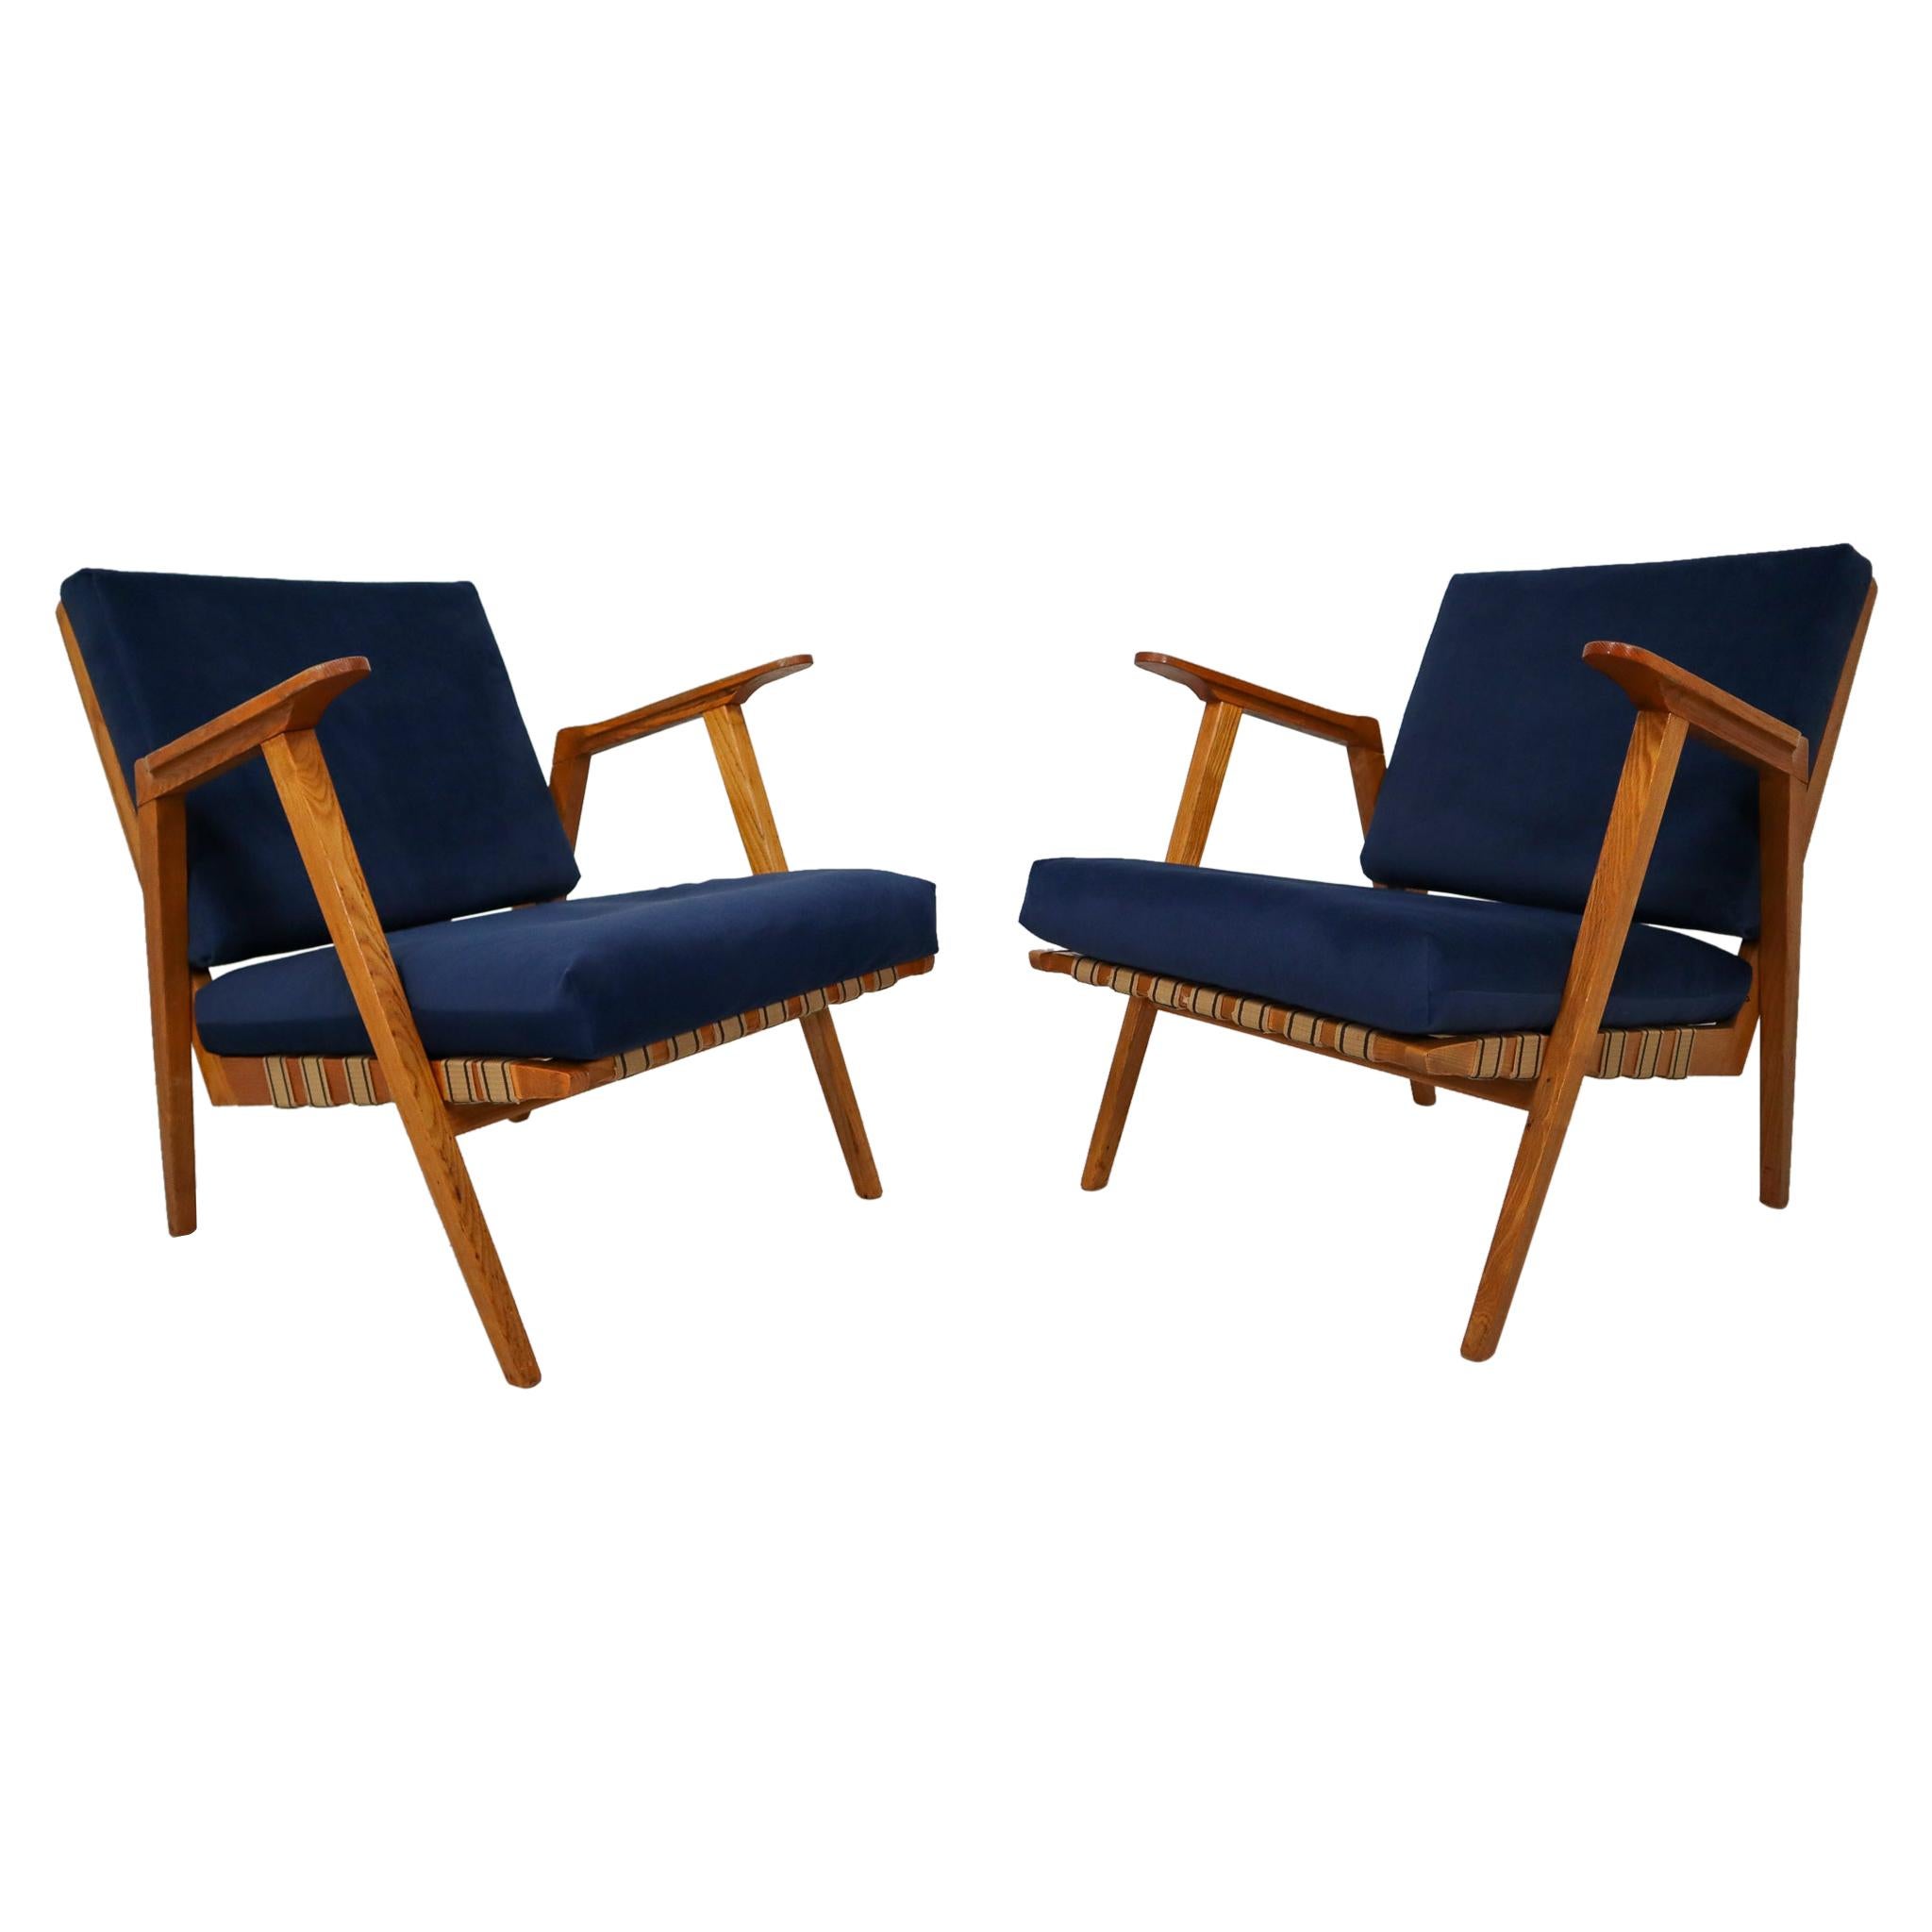 Midcentury Reupholstered Lounge Chairs in Blue Velvet, Czech Republic, 1960s